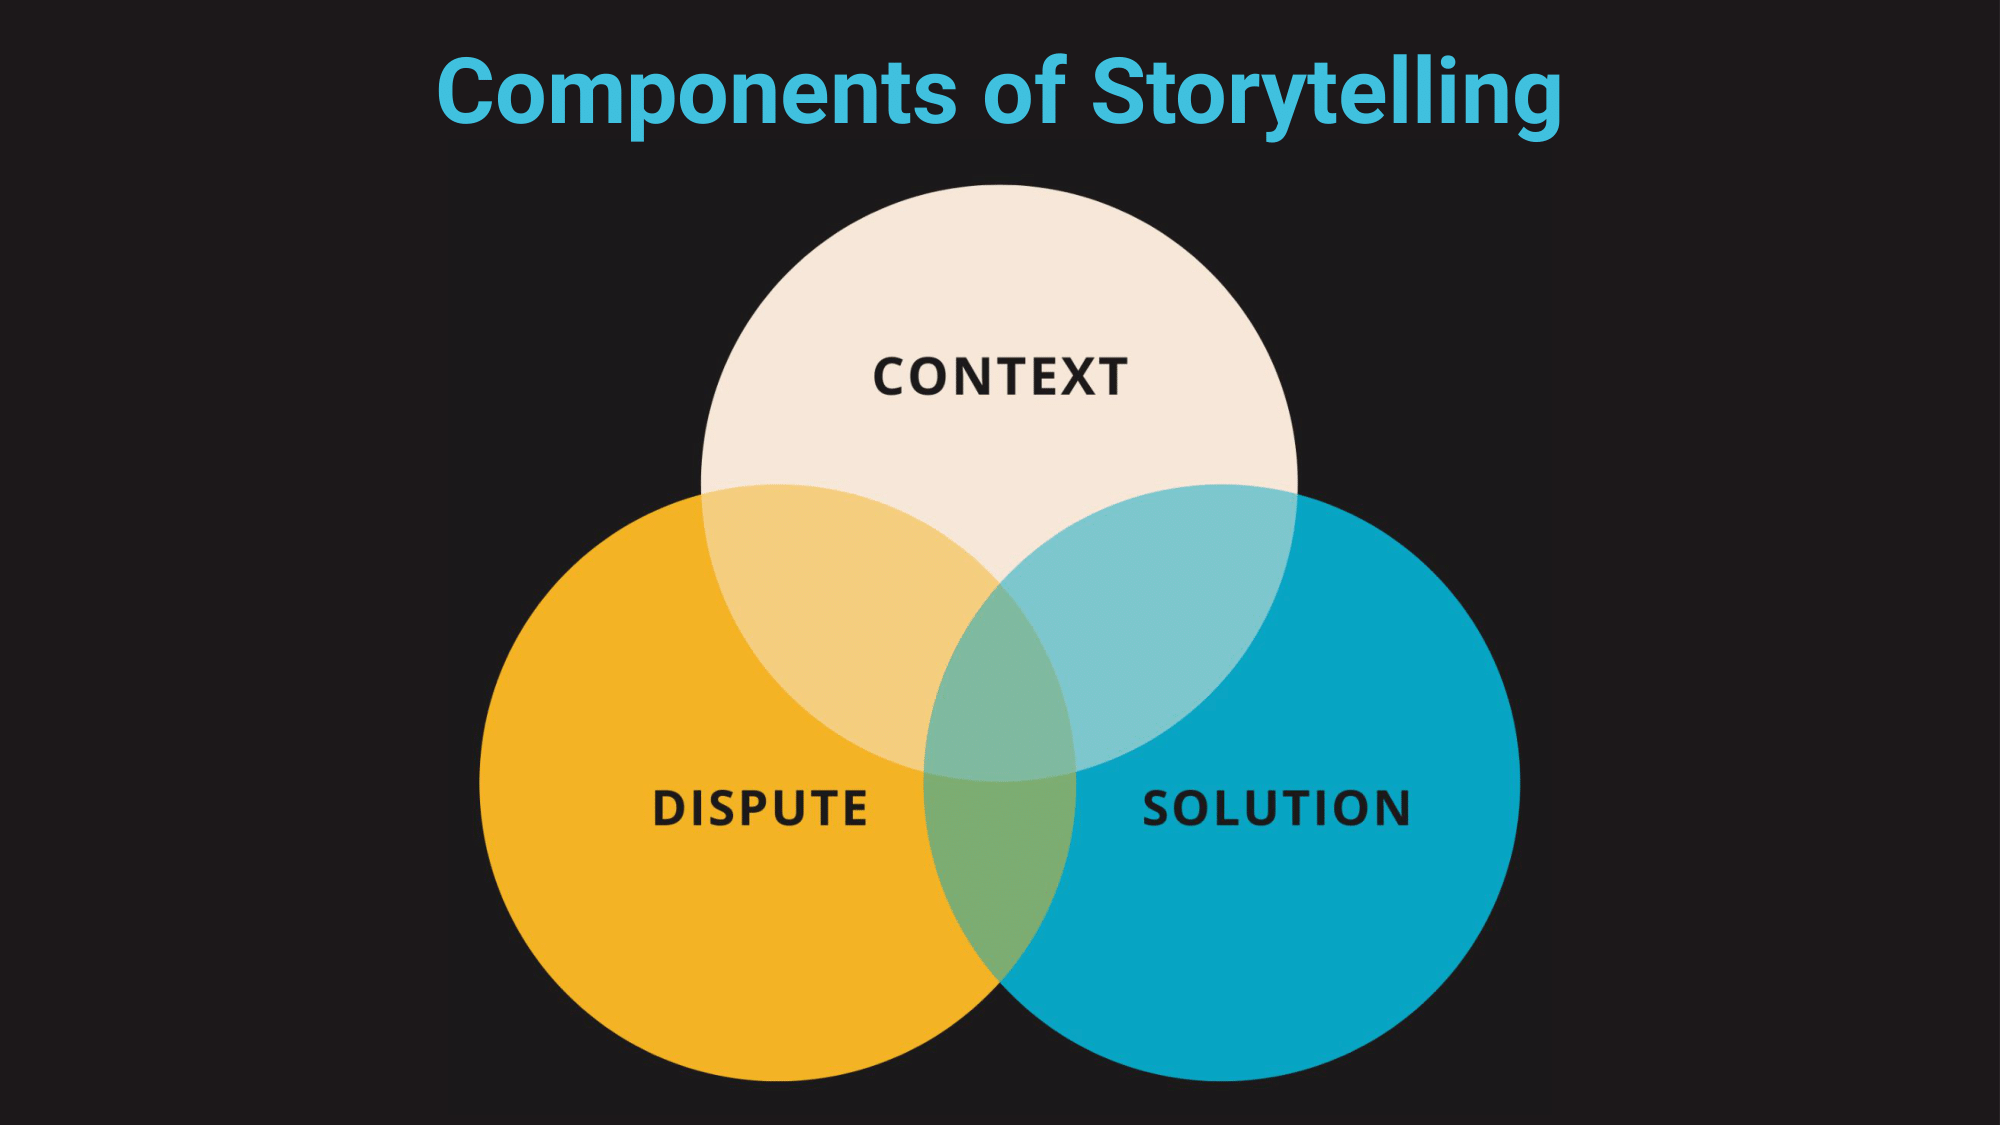 Graphic showing the components of storytelling: context, dispute, and solution.